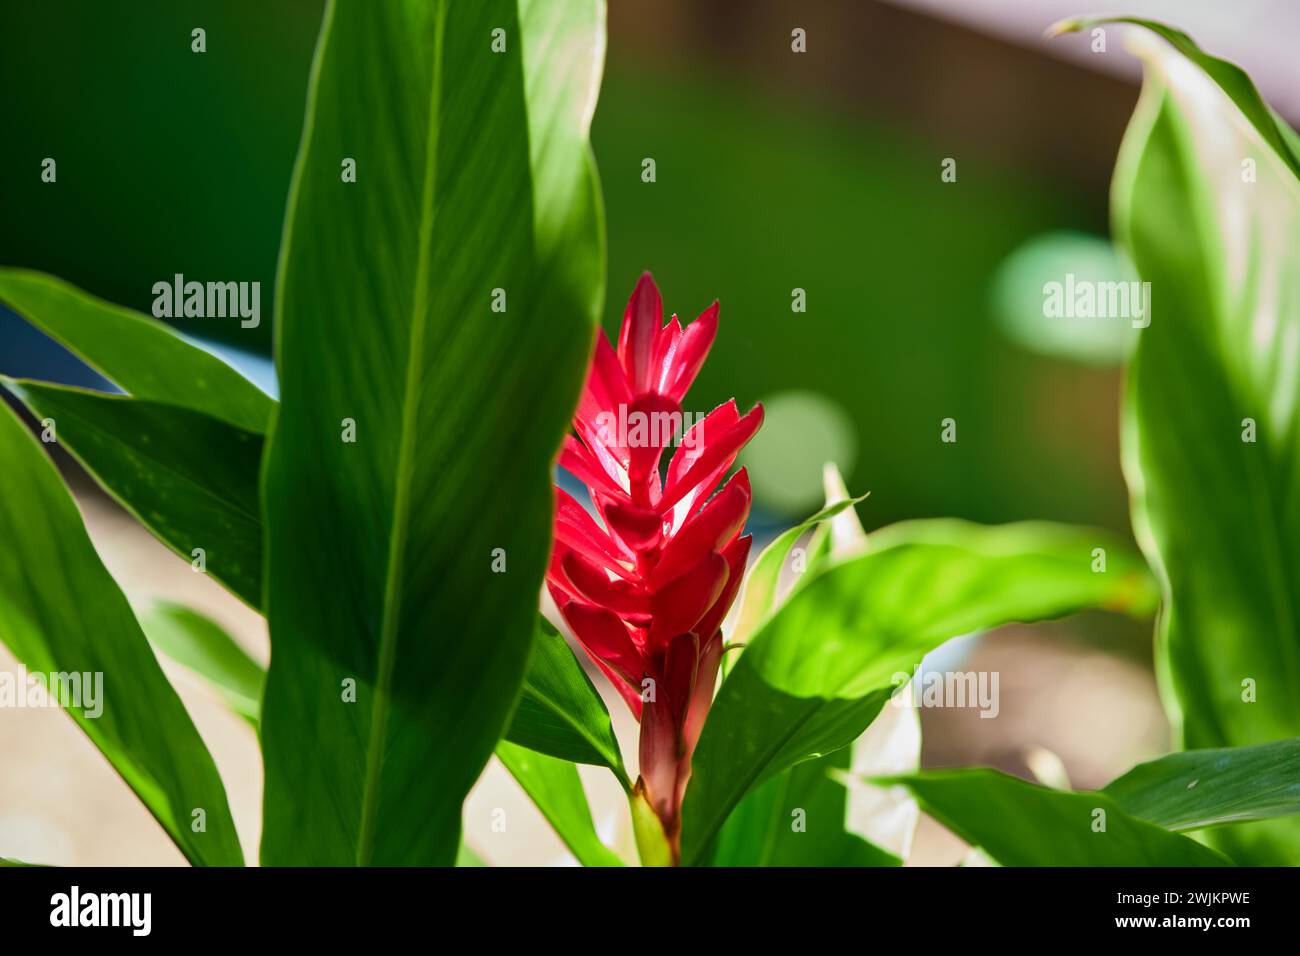 Close-up of red ginger flower blooming on plant Stock Photo